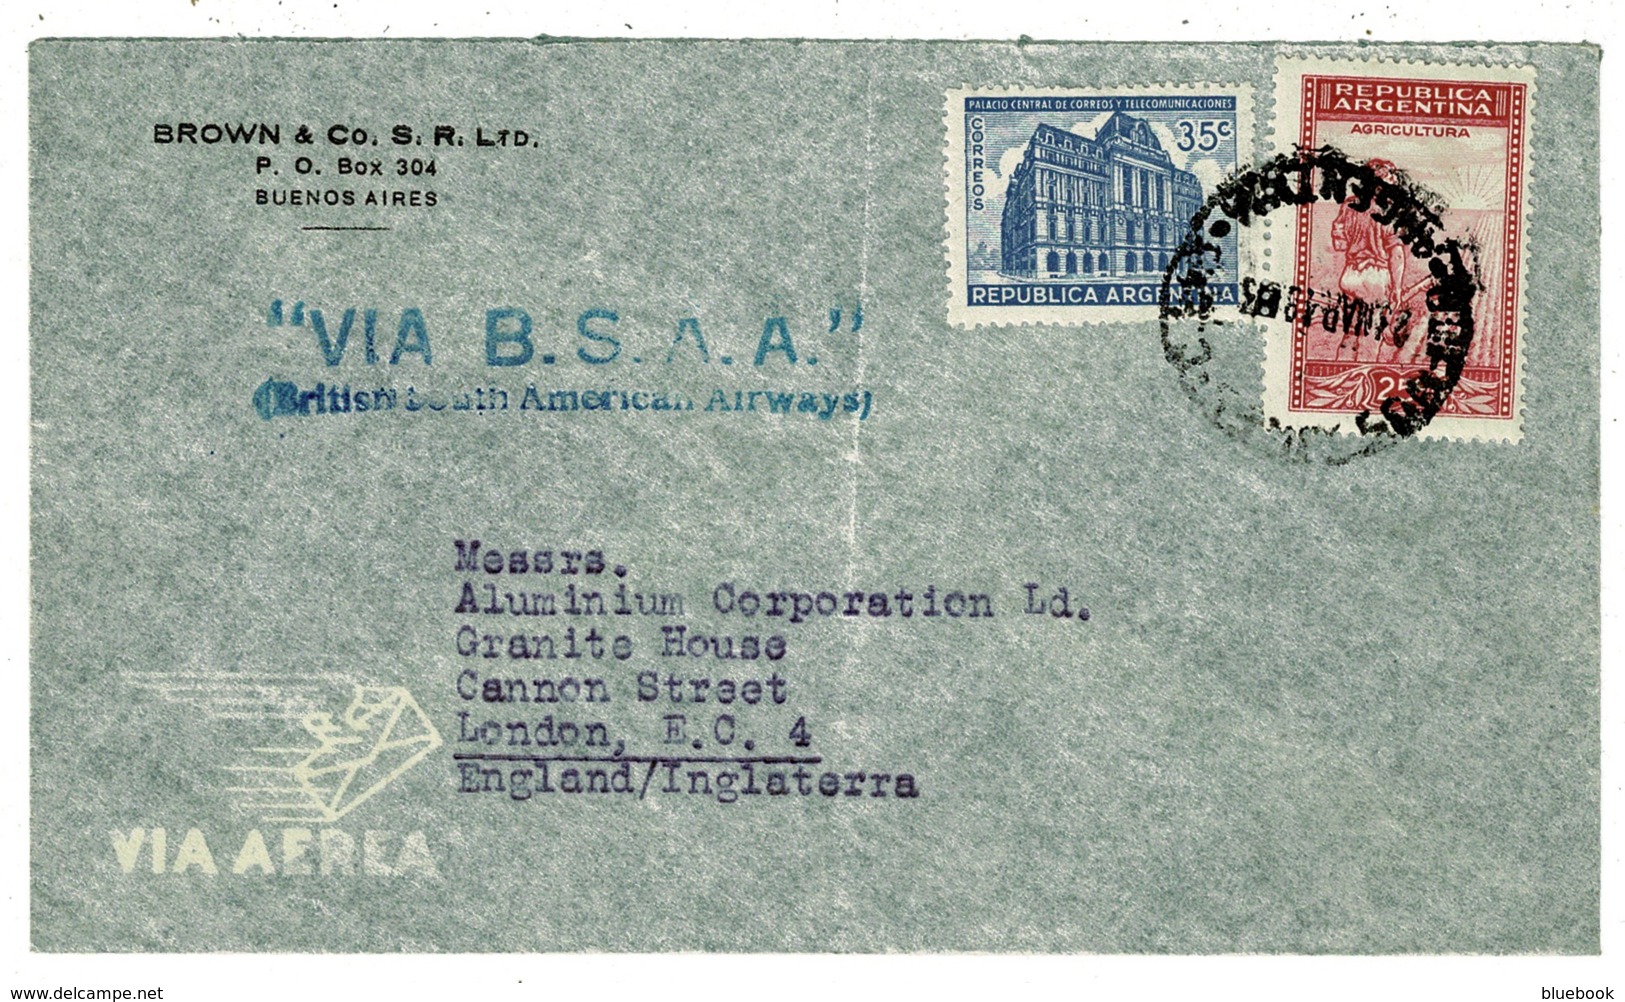 Ref 1343 - 1948 Airmail Cover Argentina To London By British South America Airways B.S.A.A. - Airmail